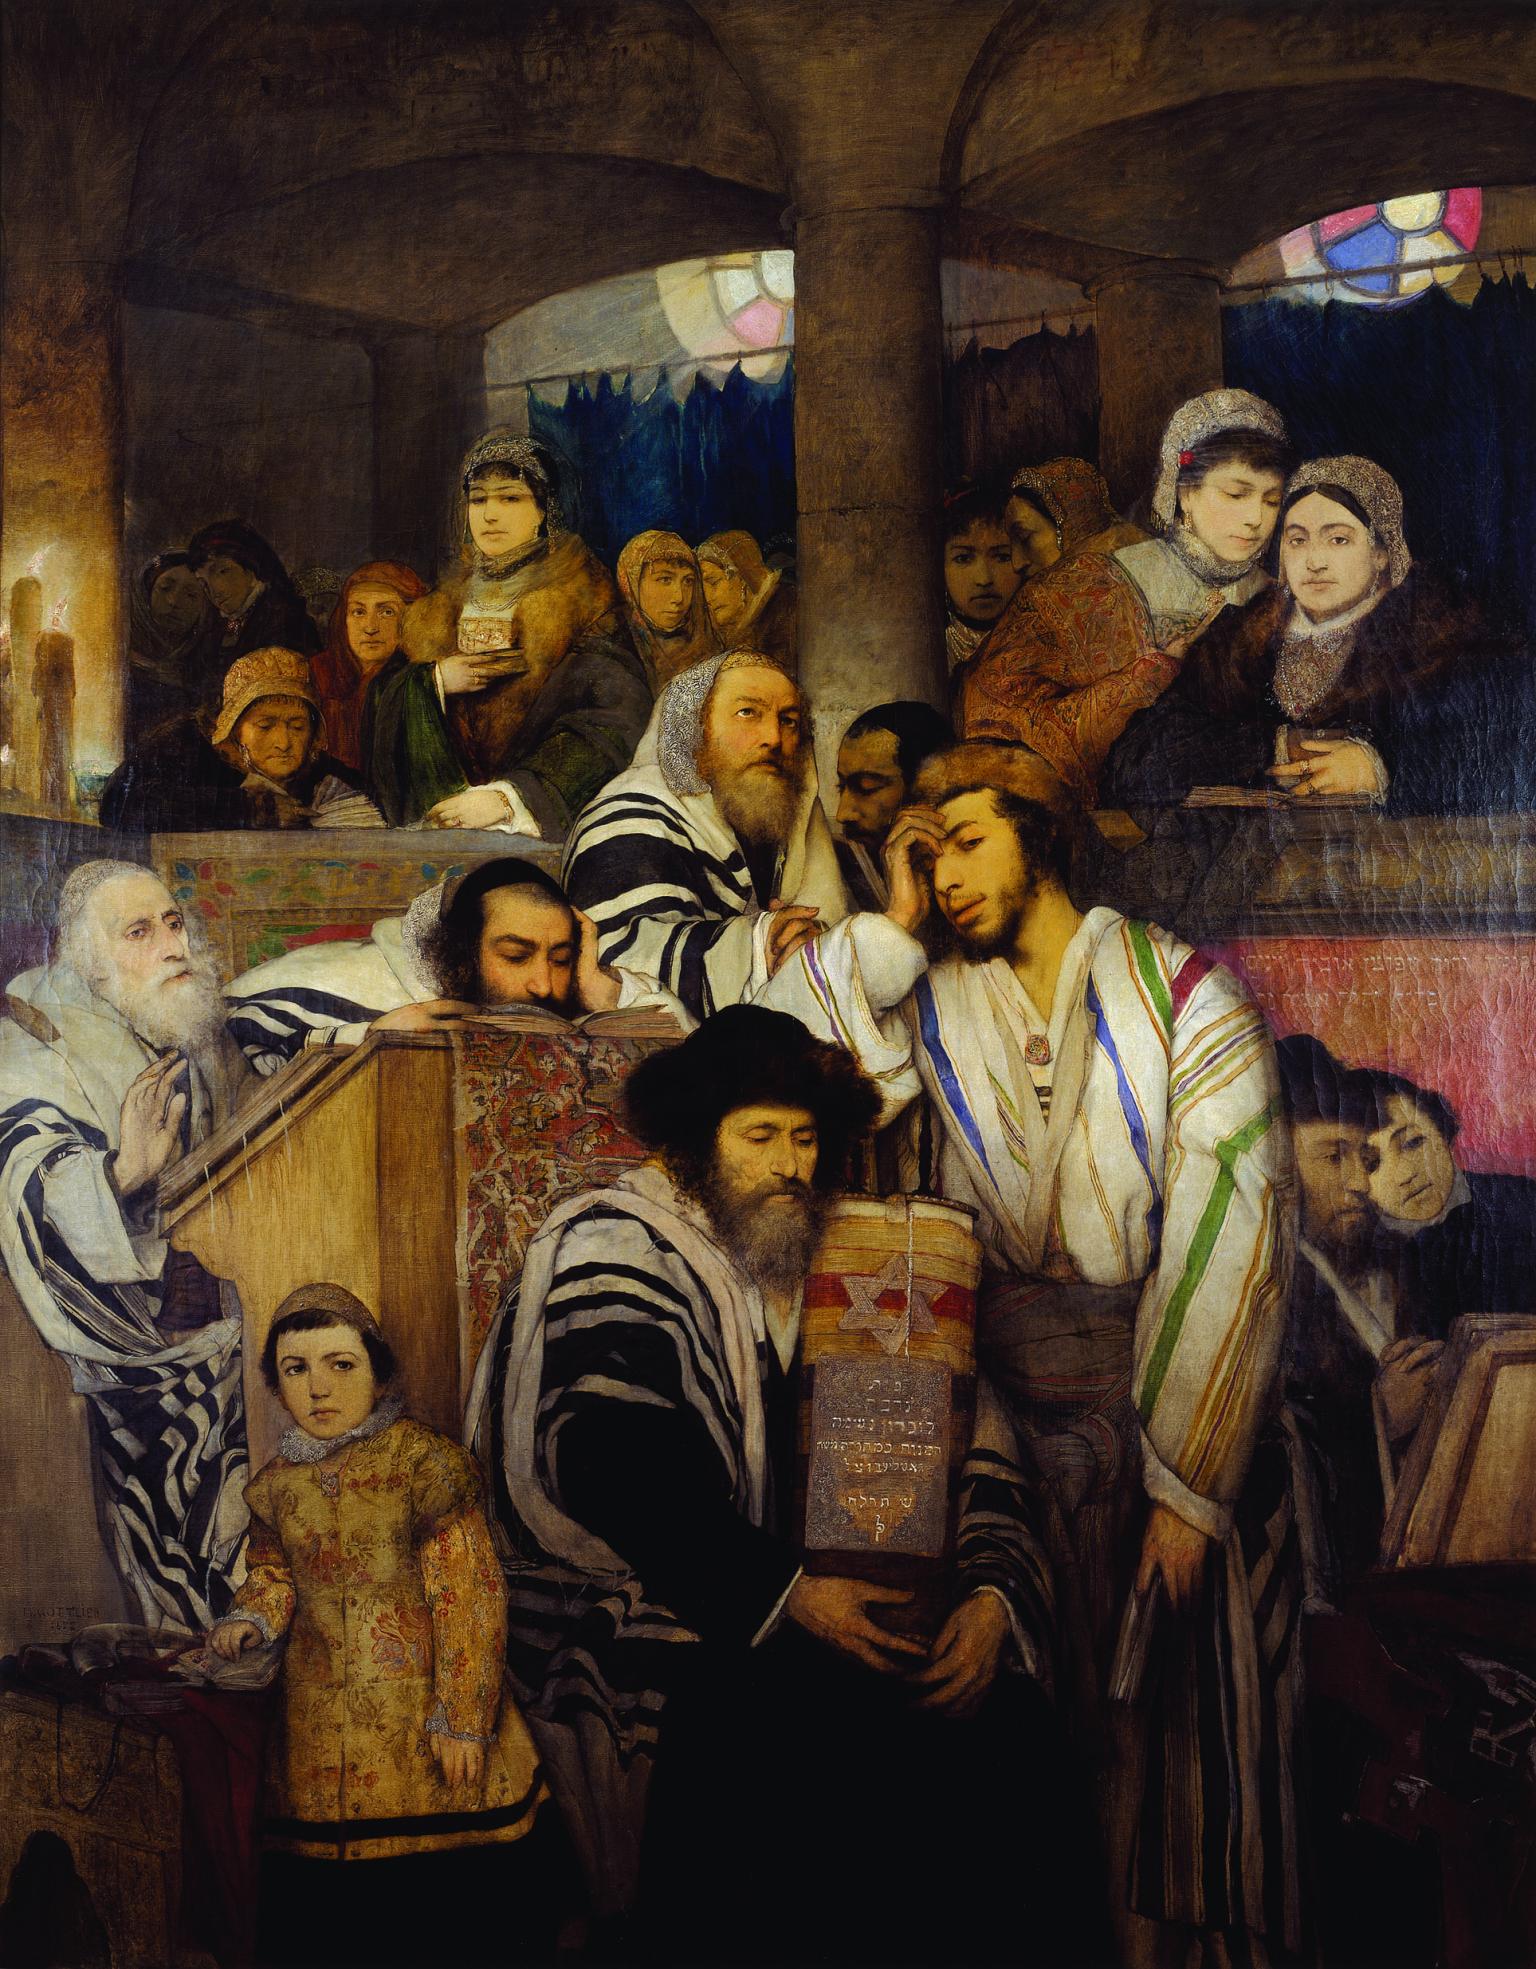 Painting depicting men in skullcaps and prayer shawls in foreground at podiums, one holding a Torah scroll, and women in background in hats and shawls.